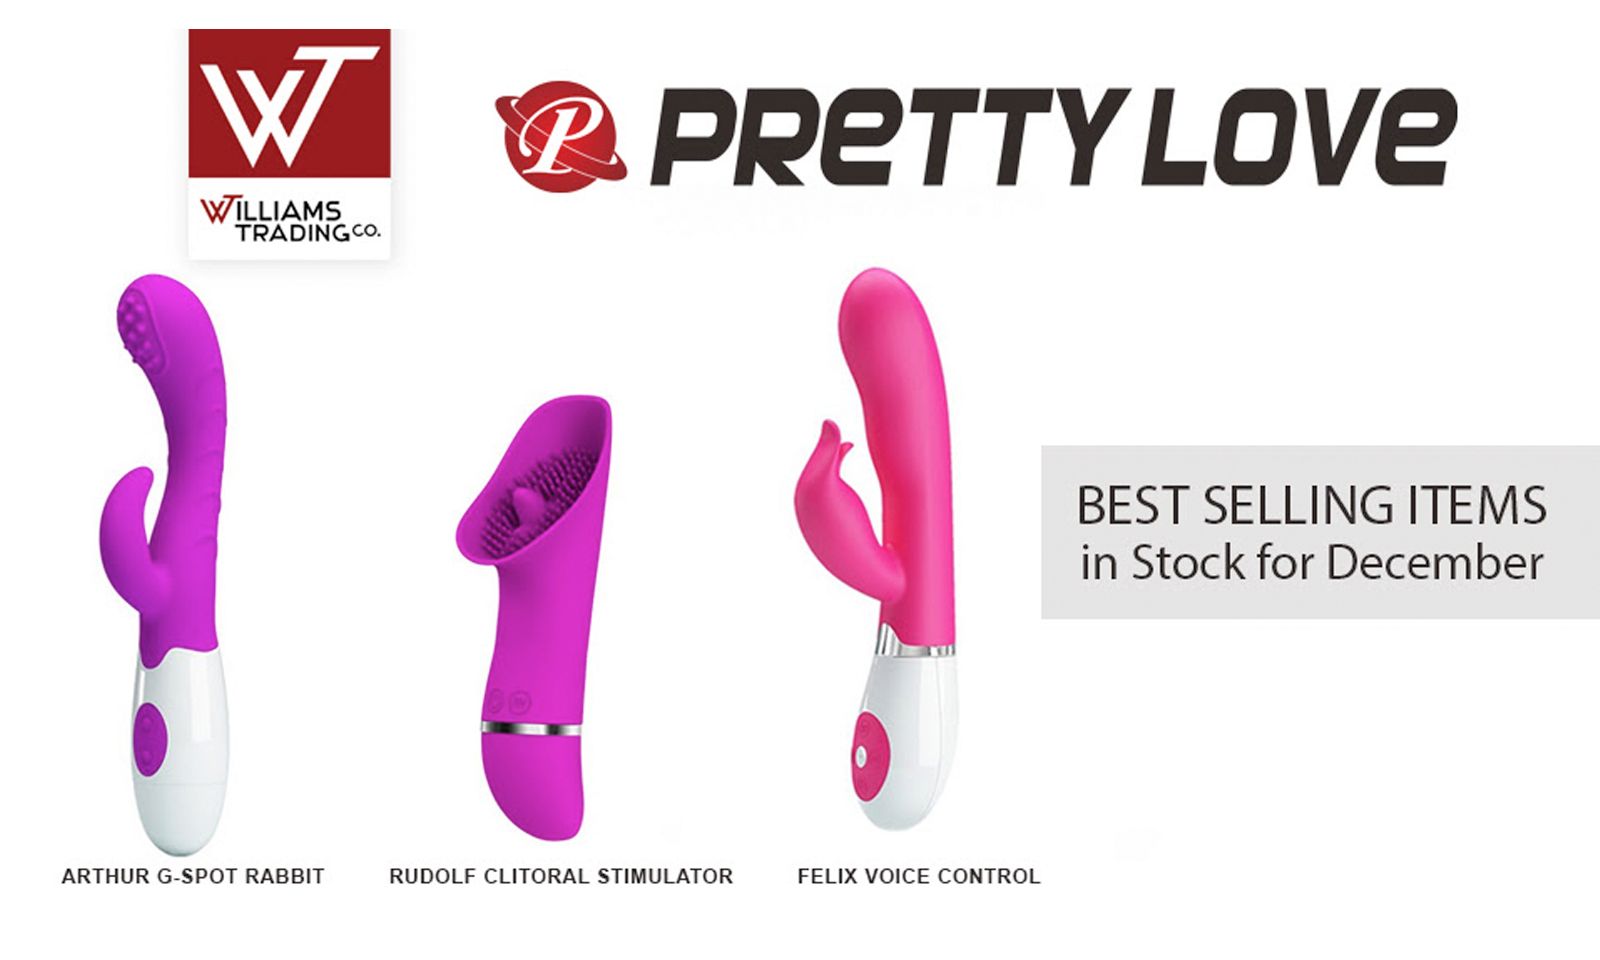 Williams Trading Launches Pretty Love Best Seller Product Range